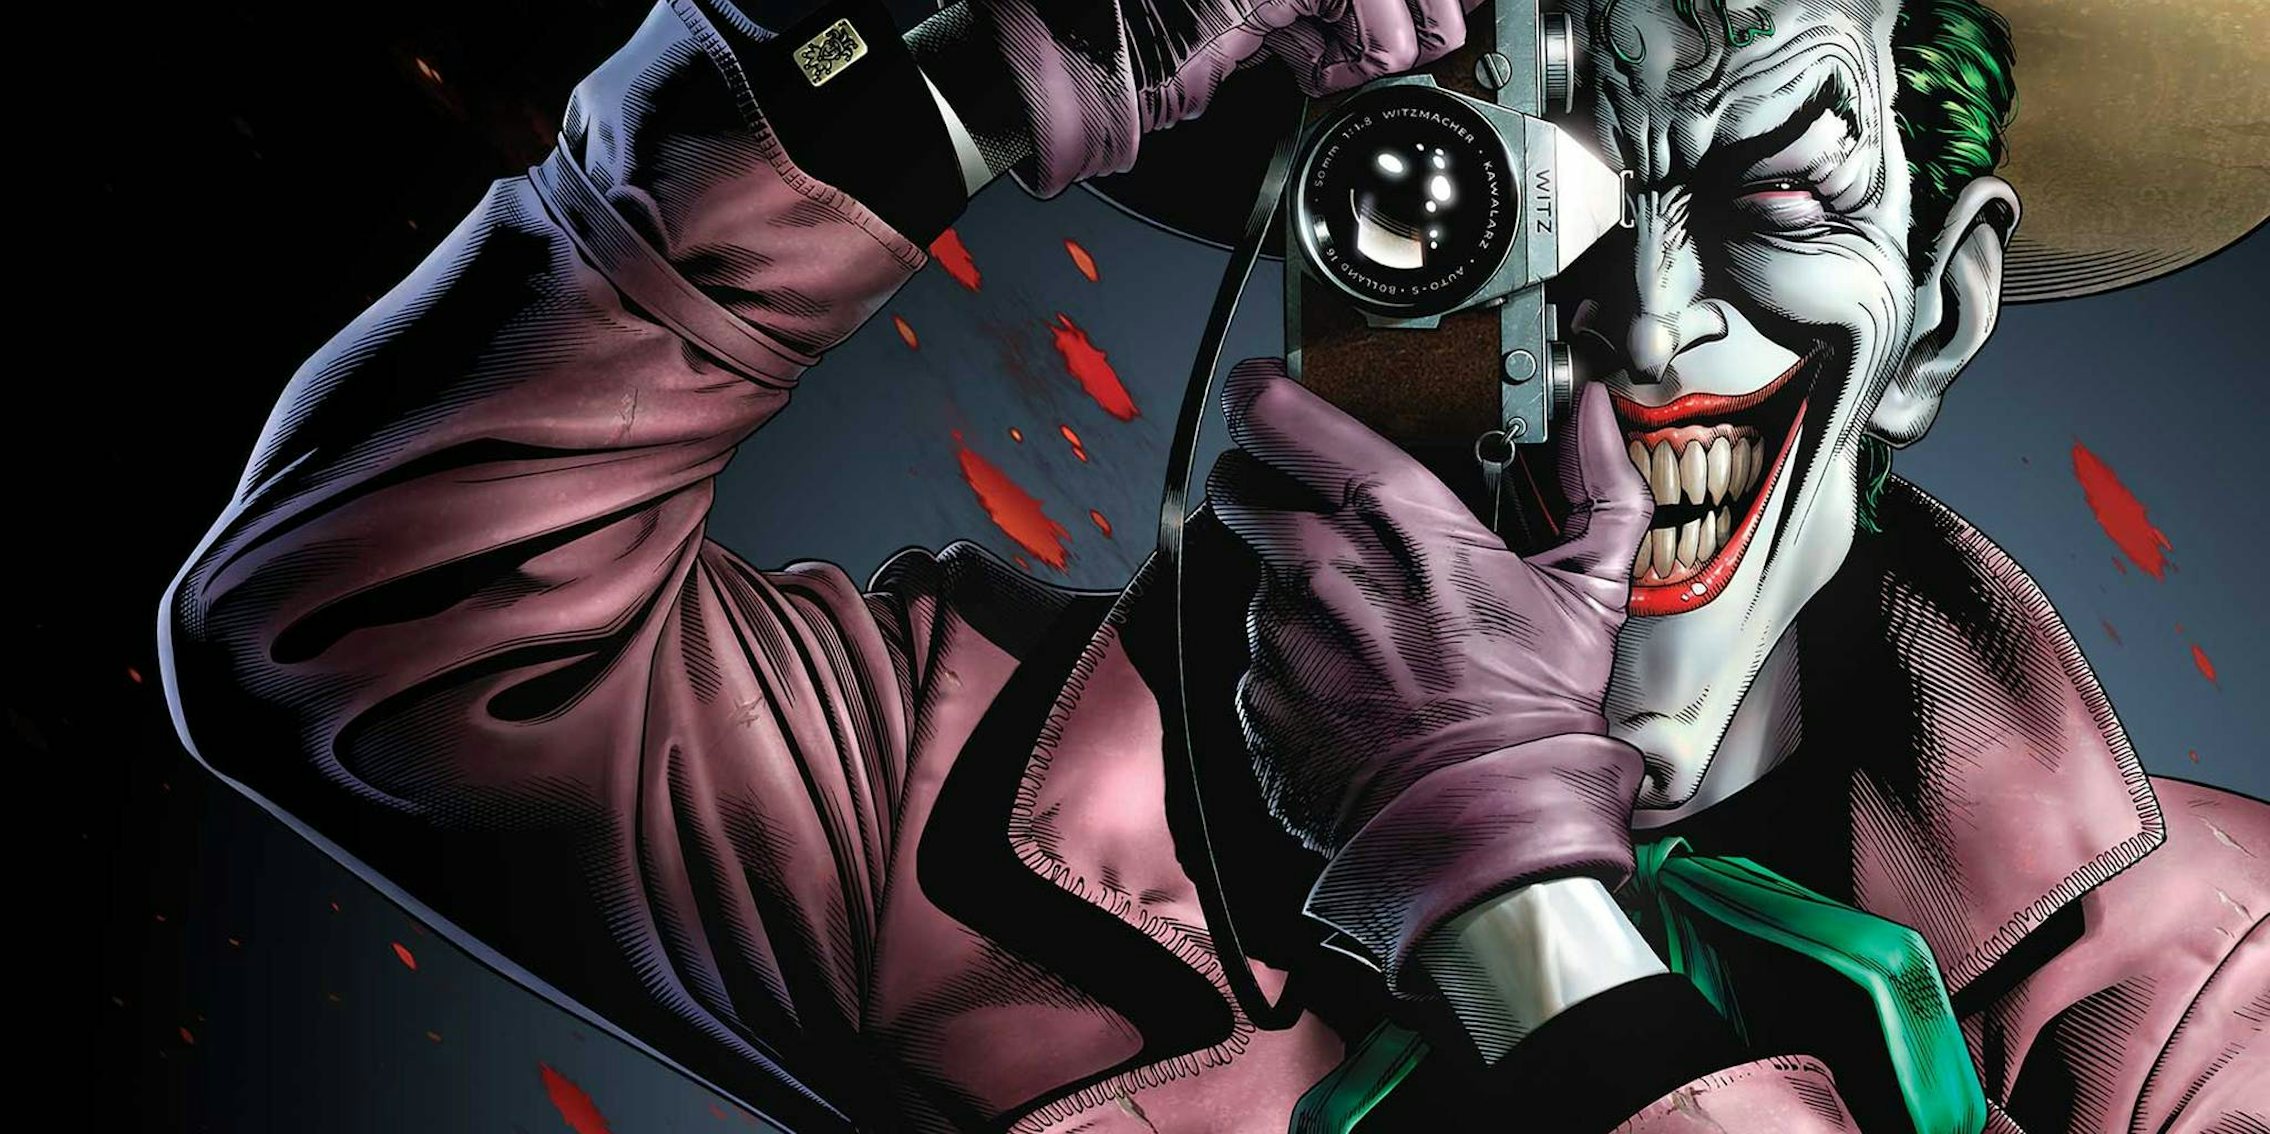 Review: 'Batman: The Killing Joke' is a huge disappointment - The Daily Dot